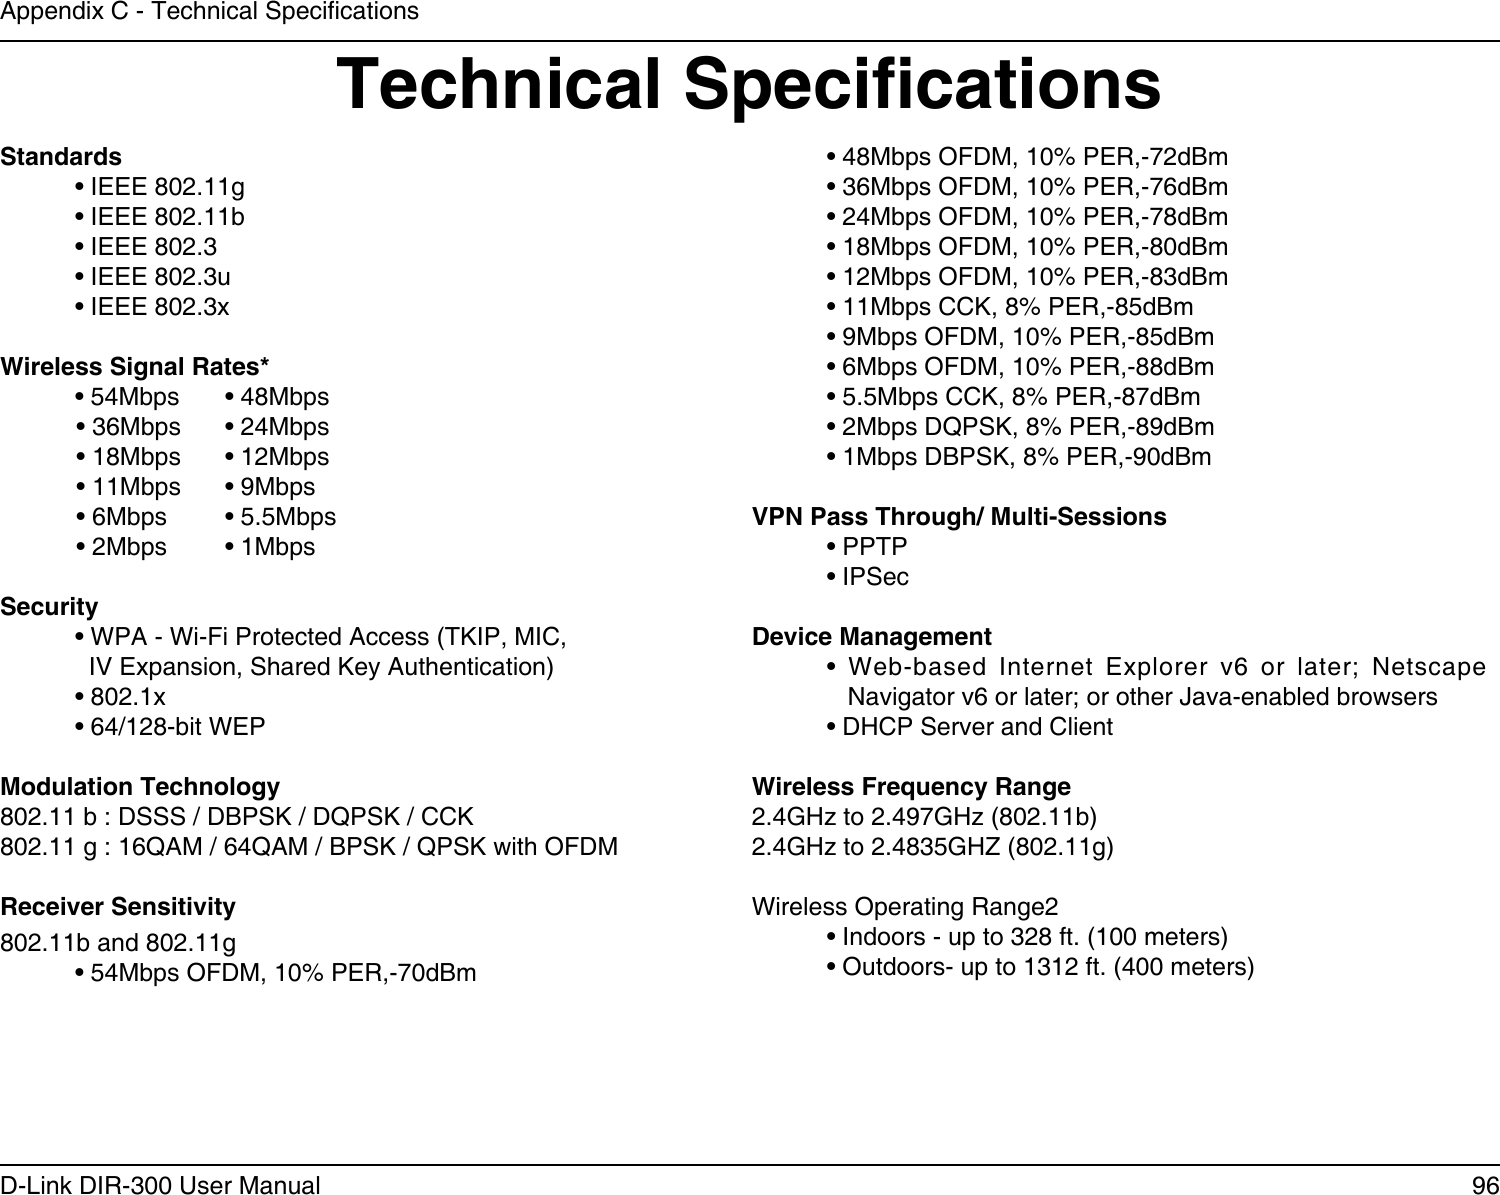 96D-Link DIR-300 User ManualAppendix C - Technical SpecicationsTechnical SpecicationsStandards  • IEEE 802.11g  • IEEE 802.11b  • IEEE 802.3  • IEEE 802.3u  • IEEE 802.3xWireless Signal Rates*  • 54Mbps   • 48Mbps            • 36Mbps  • 24Mbps            • 18Mbps  • 12Mbps            • 11Mbps   • 9Mbps            • 6Mbps   • 5.5Mbps            • 2Mbps   • 1MbpsSecurity  • WPA - Wi-Fi Protected Access (TKIP, MIC,    IV Expansion, Shared Key Authentication)  • 802.1x  • 64/128-bit WEPModulation Technology802.11 b : DSSS / DBPSK / DQPSK / CCK802.11 g : 16QAM / 64QAM / BPSK / QPSK with OFDM Receiver Sensitivity802.11b and 802.11g• 54Mbps OFDM, 10% PER,-70dBm• 48Mbps OFDM, 10% PER,-72dBm• 36Mbps OFDM, 10% PER,-76dBm• 24Mbps OFDM, 10% PER,-78dBm• 18Mbps OFDM, 10% PER,-80dBm• 12Mbps OFDM, 10% PER,-83dBm• 11Mbps CCK, 8% PER,-85dBm• 9Mbps OFDM, 10% PER,-85dBm• 6Mbps OFDM, 10% PER,-88dBm• 5.5Mbps CCK, 8% PER,-87dBm• 2Mbps DQPSK, 8% PER,-89dBm• 1Mbps DBPSK, 8% PER,-90dBmVPN Pass Through/ Multi-Sessions  • PPTP   • IPSecDevice Management  •  Web-based  Internet  Explorer  v6  or  later;  Netscape       Navigator v6 or later; or other Java-enabled browsers  • DHCP Server and ClientWireless Frequency Range2.4GHz to 2.497GHz (802.11b)2.4GHz to 2.4835GHZ (802.11g)Wireless Operating Range2  • Indoors - up to 328 ft. (100 meters)  • Outdoors- up to 1312 ft. (400 meters)